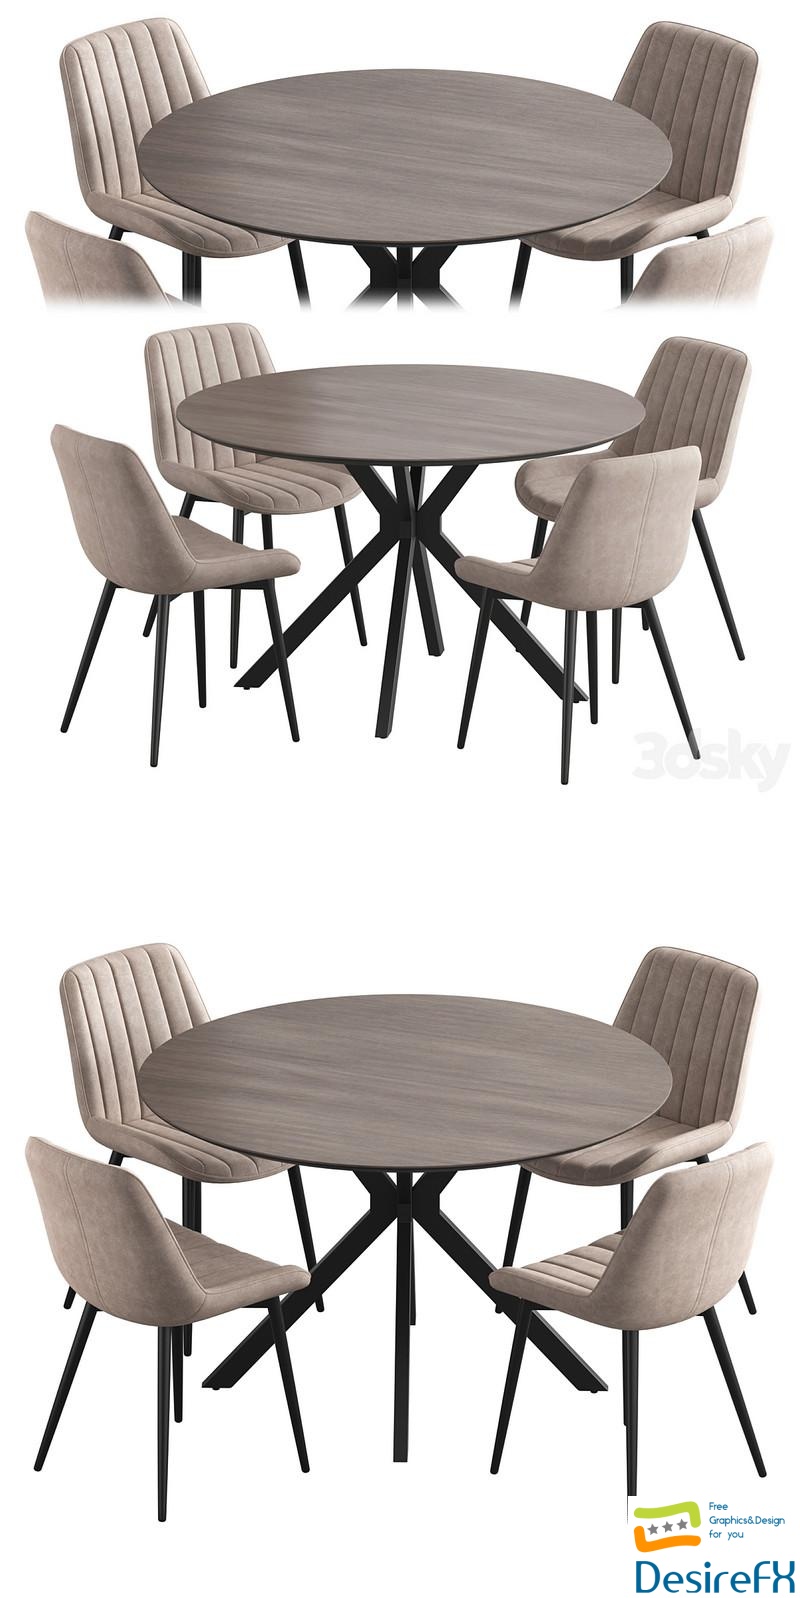 Ralf table Anant chair Dining set 3D Model